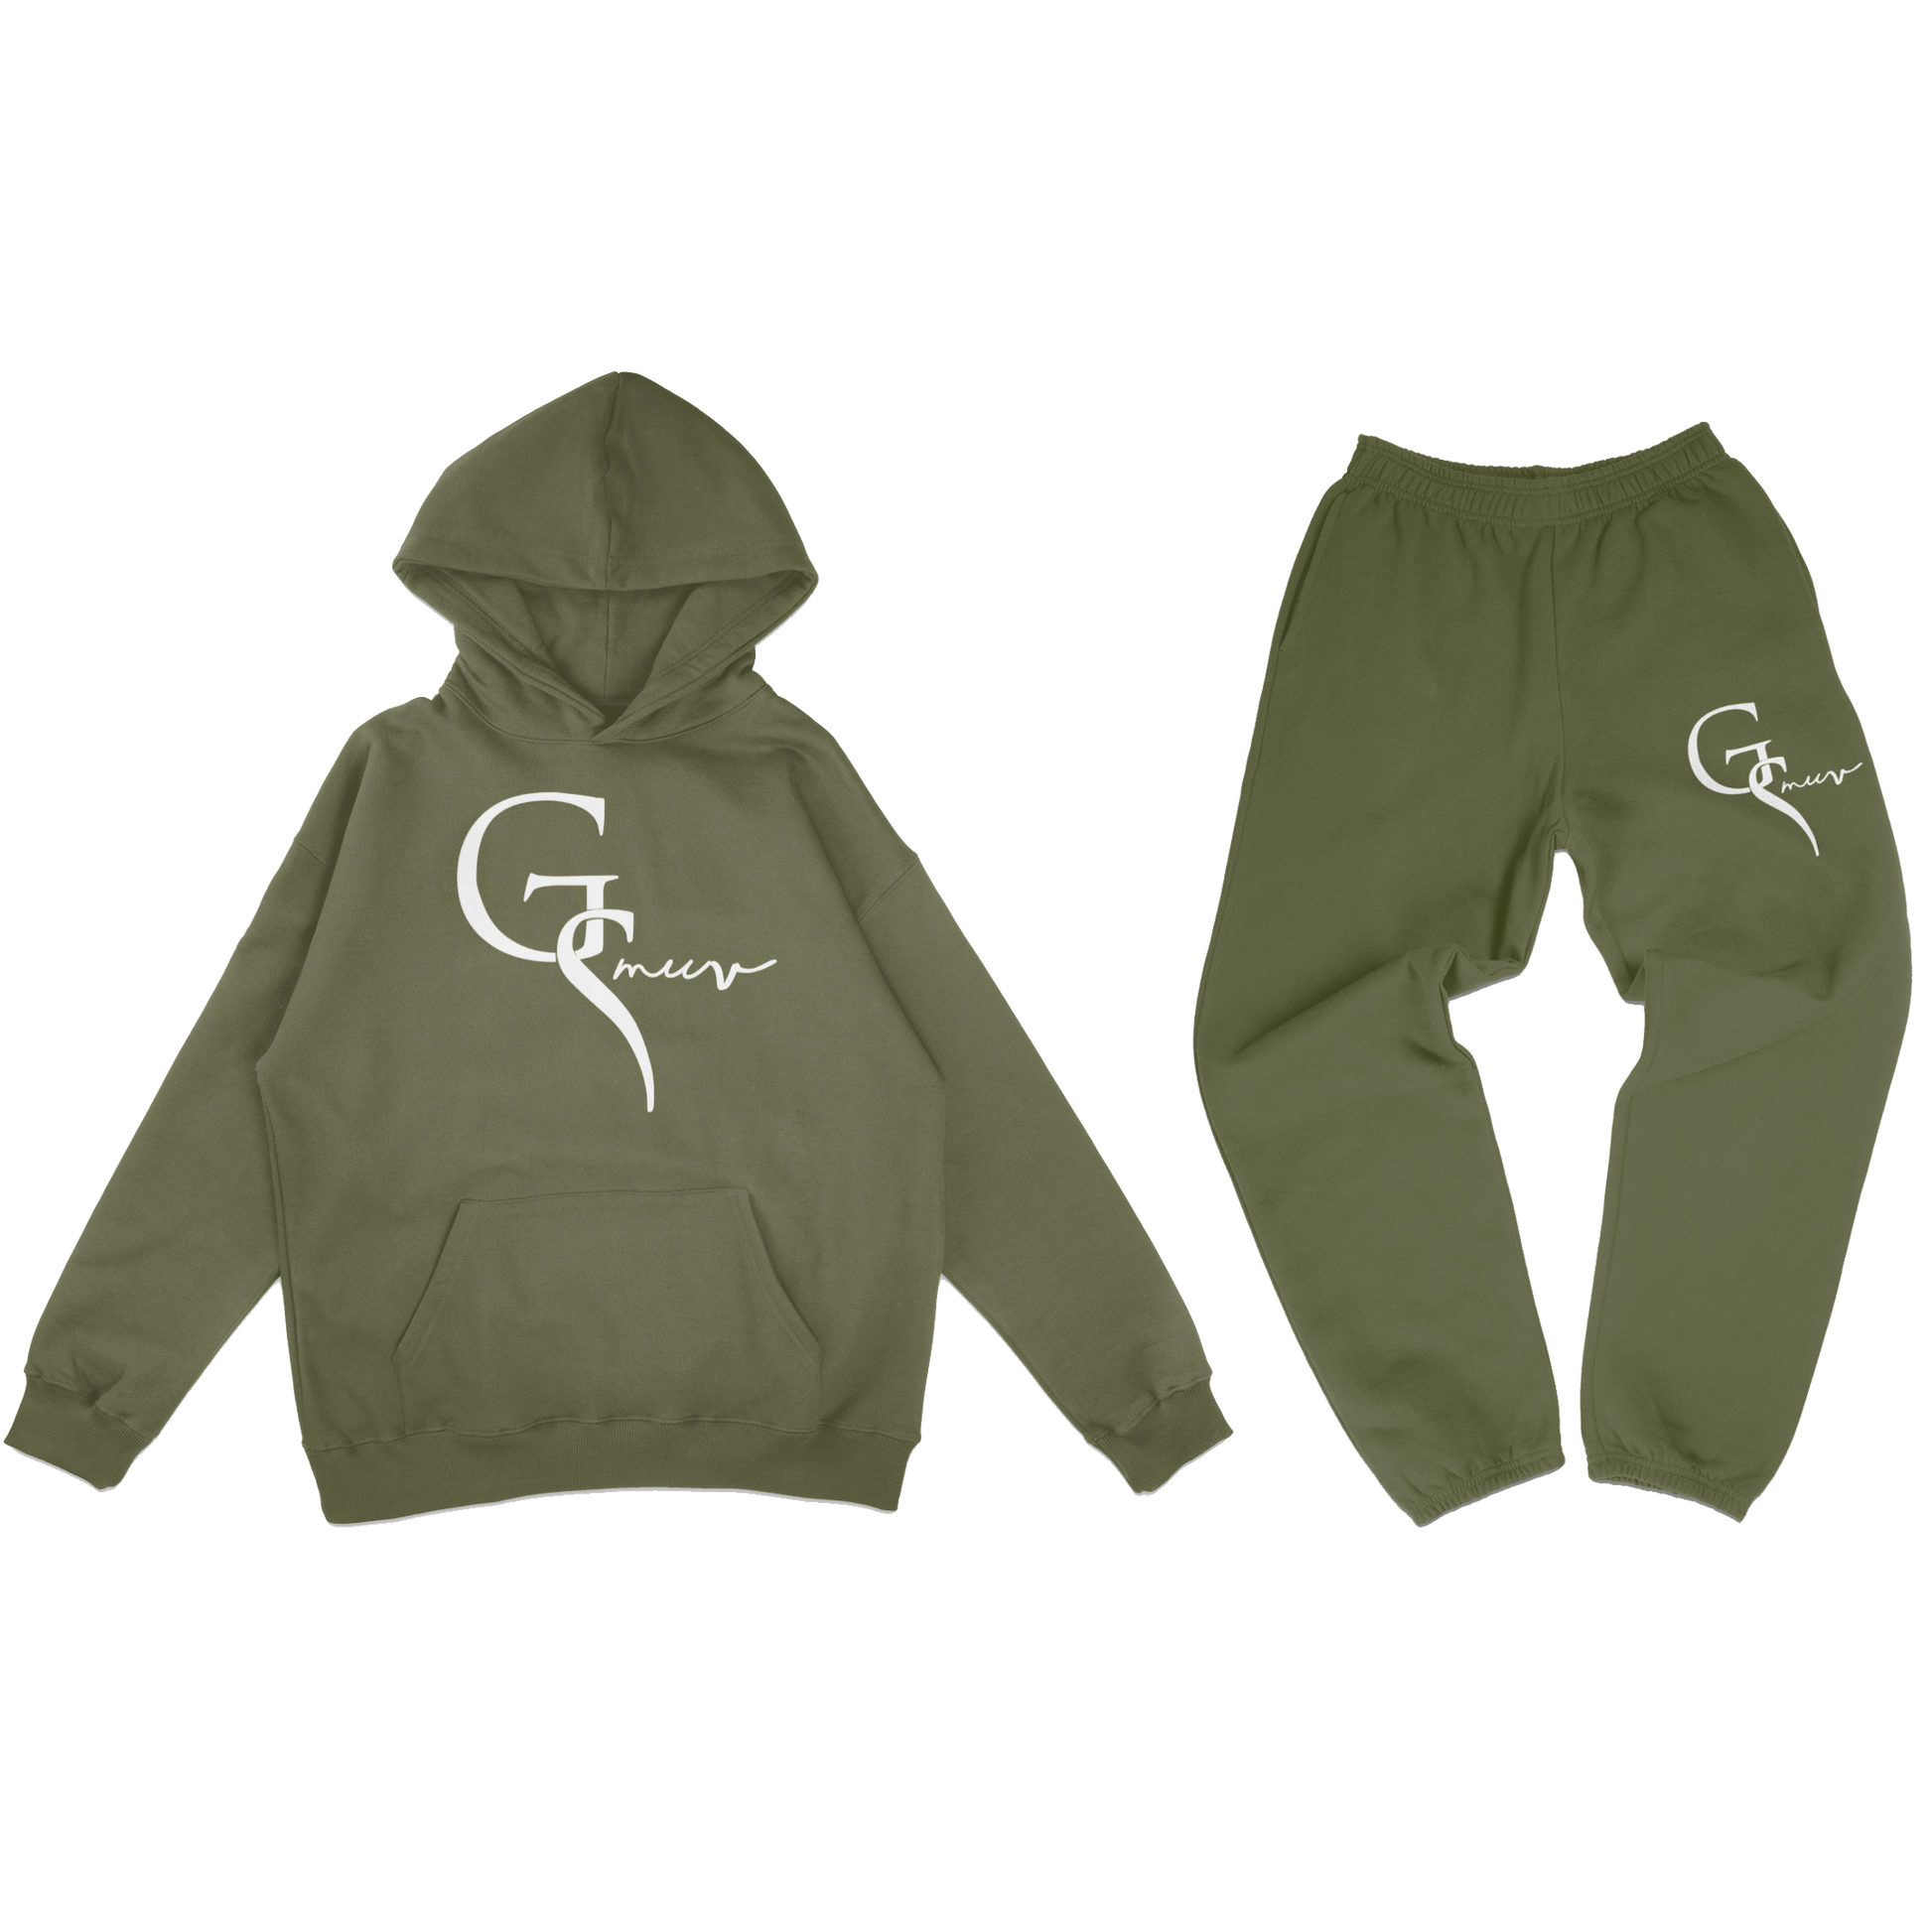 Olive green jogger set with white GSMUV logo on the front side of both clothing items